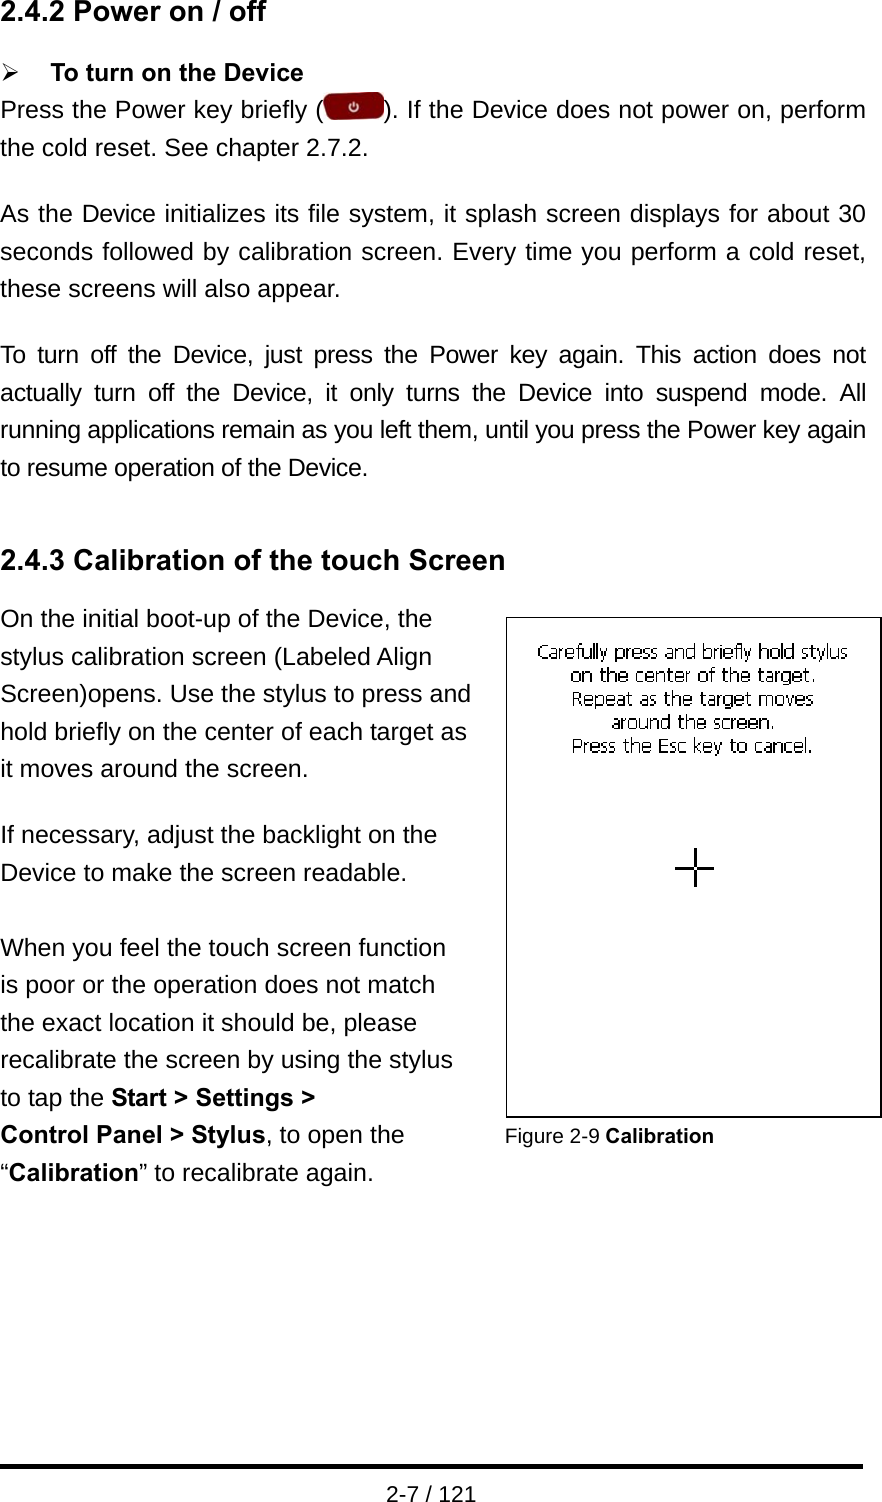  2-7 / 121 2.4.2 Power on / off  ¾ To turn on the Device Press the Power key briefly ( ). If the Device does not power on, perform the cold reset. See chapter 2.7.2.  As the Device initializes its file system, it splash screen displays for about 30 seconds followed by calibration screen. Every time you perform a cold reset, these screens will also appear.  To turn off the Device, just press the Power key again. This action does not actually turn off the Device, it only turns the Device into suspend mode. All running applications remain as you left them, until you press the Power key again to resume operation of the Device.   2.4.3 Calibration of the touch Screen On the initial boot-up of the Device, the   stylus calibration screen (Labeled Align   Screen)opens. Use the stylus to press and   hold briefly on the center of each target as it moves around the screen.  If necessary, adjust the backlight on the   Device to make the screen readable.    When you feel the touch screen function   is poor or the operation does not match   the exact location it should be, please   recalibrate the screen by using the stylus   to tap the Start &gt; Settings &gt;                Control Panel &gt; Stylus, to open the        Figure 2-9 Calibration “Calibration” to recalibrate again.                